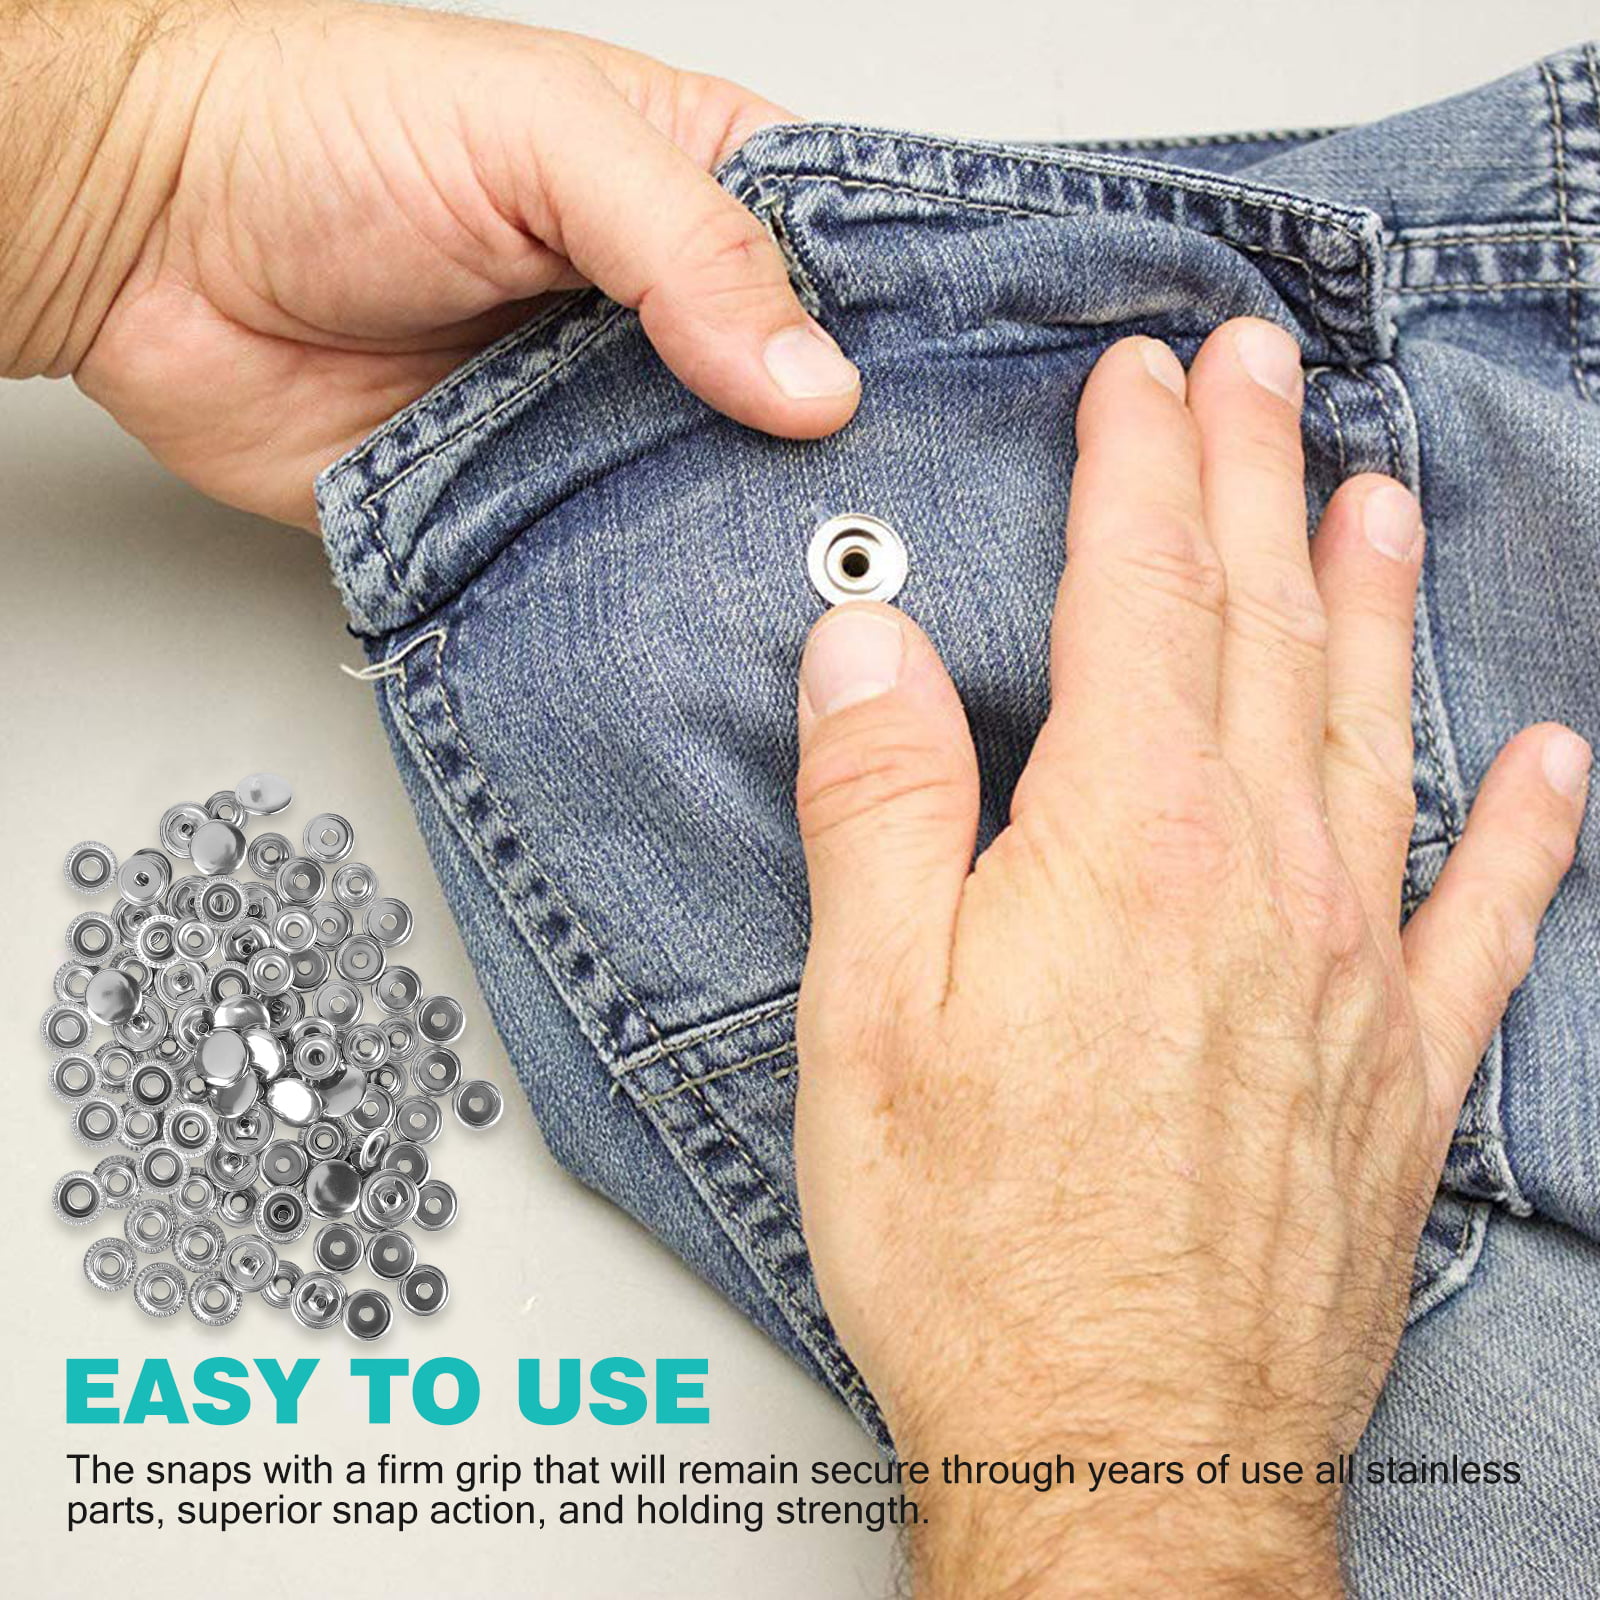 How to Replace the Button on a Pair of Jeans (with a New or Used